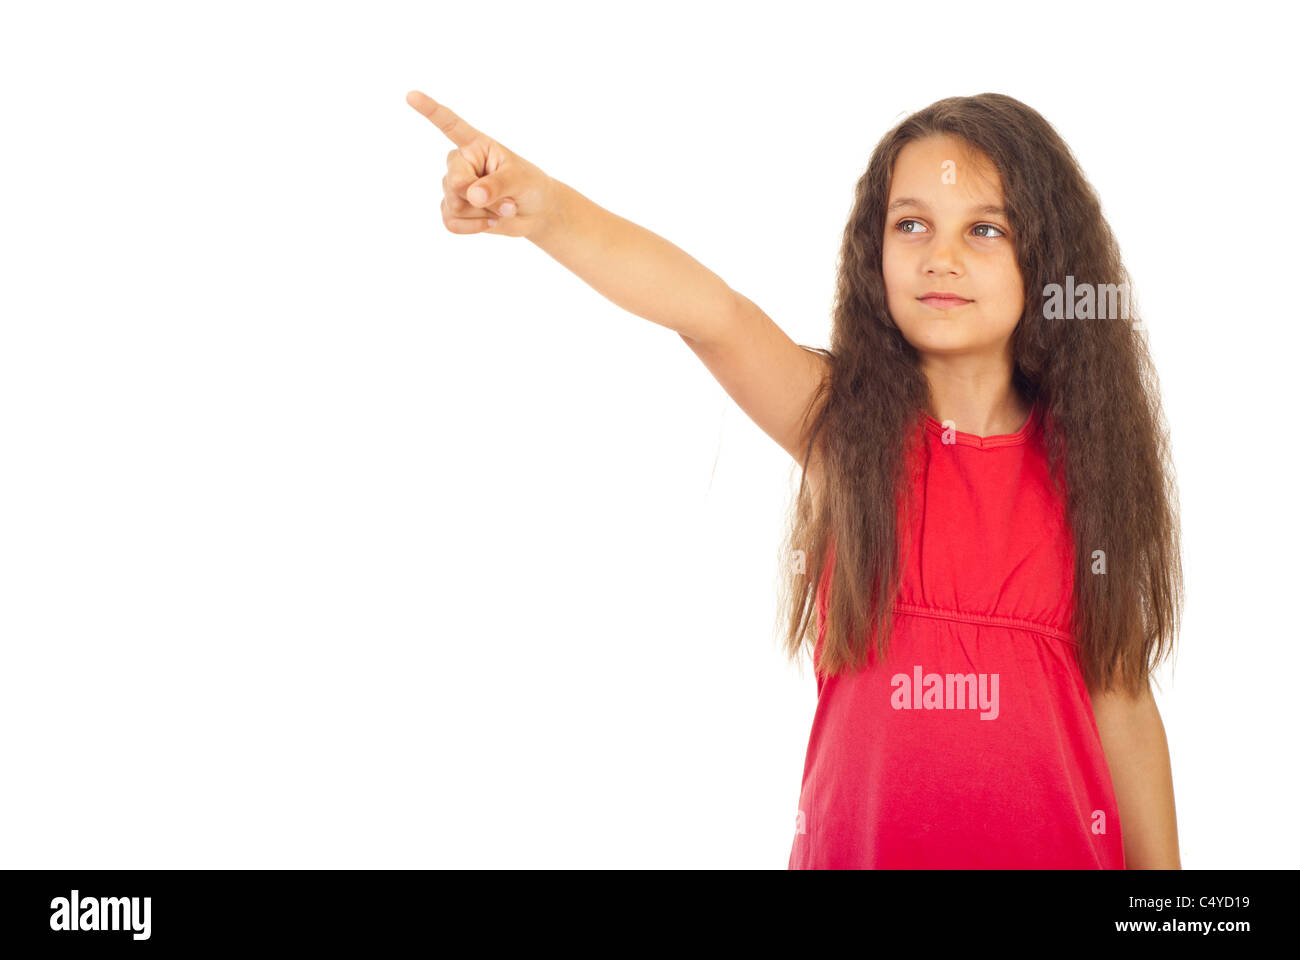 Beauty girl pointing and looking away isolated on white background Stock Photo